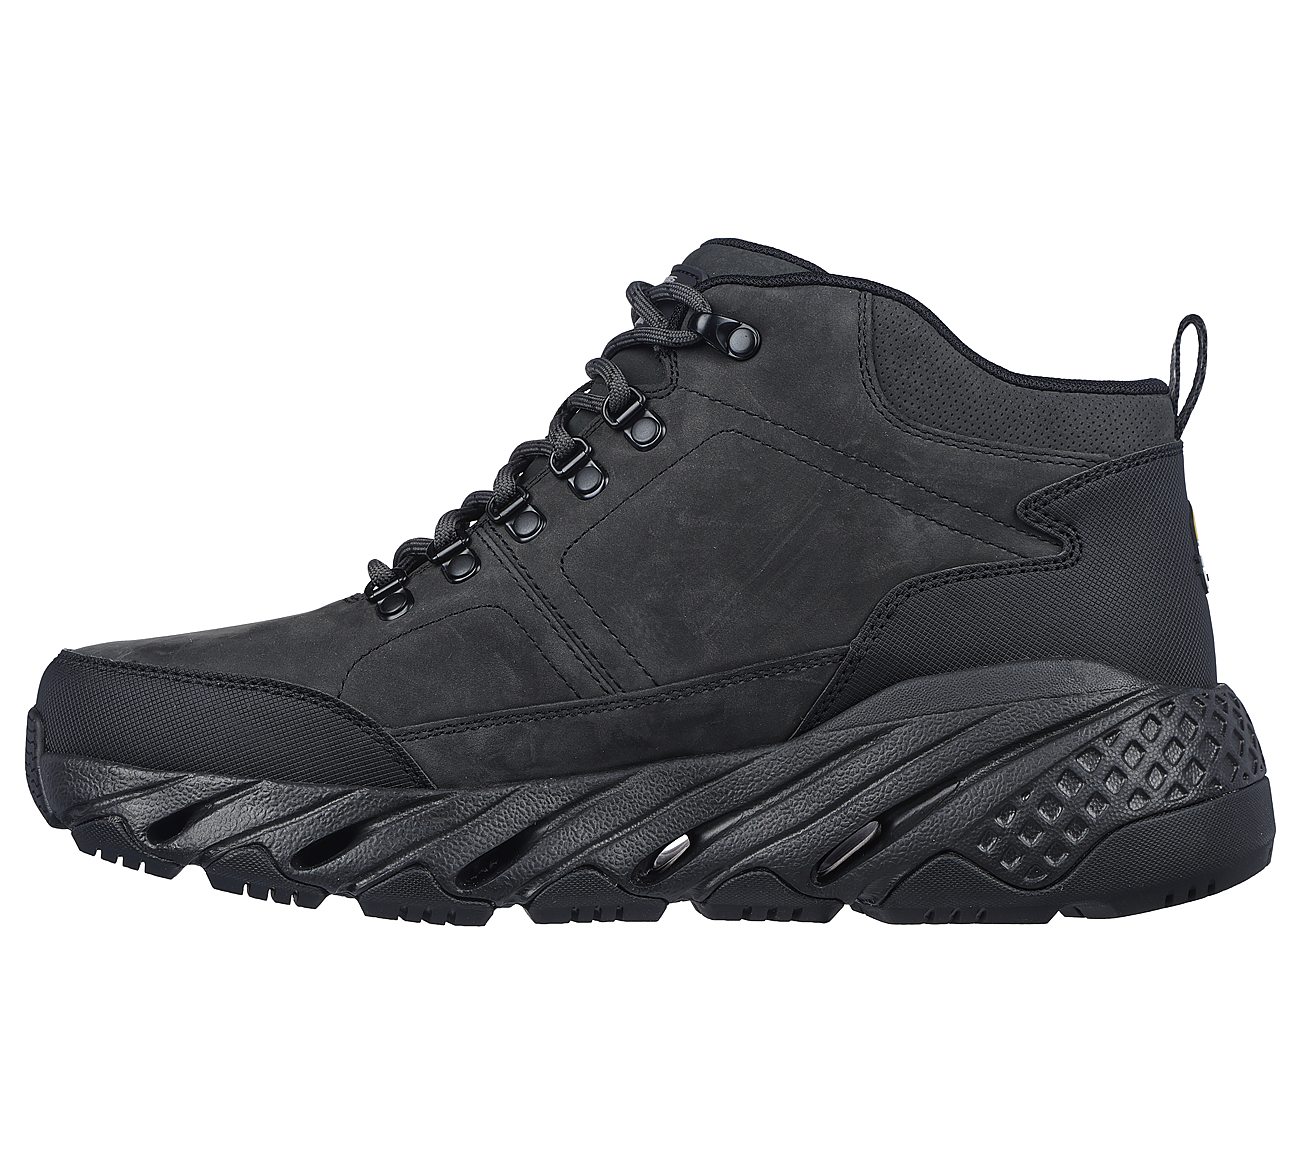 GLIDE-STEP TRAIL, CHARCOAL/BLACK Footwear Left View